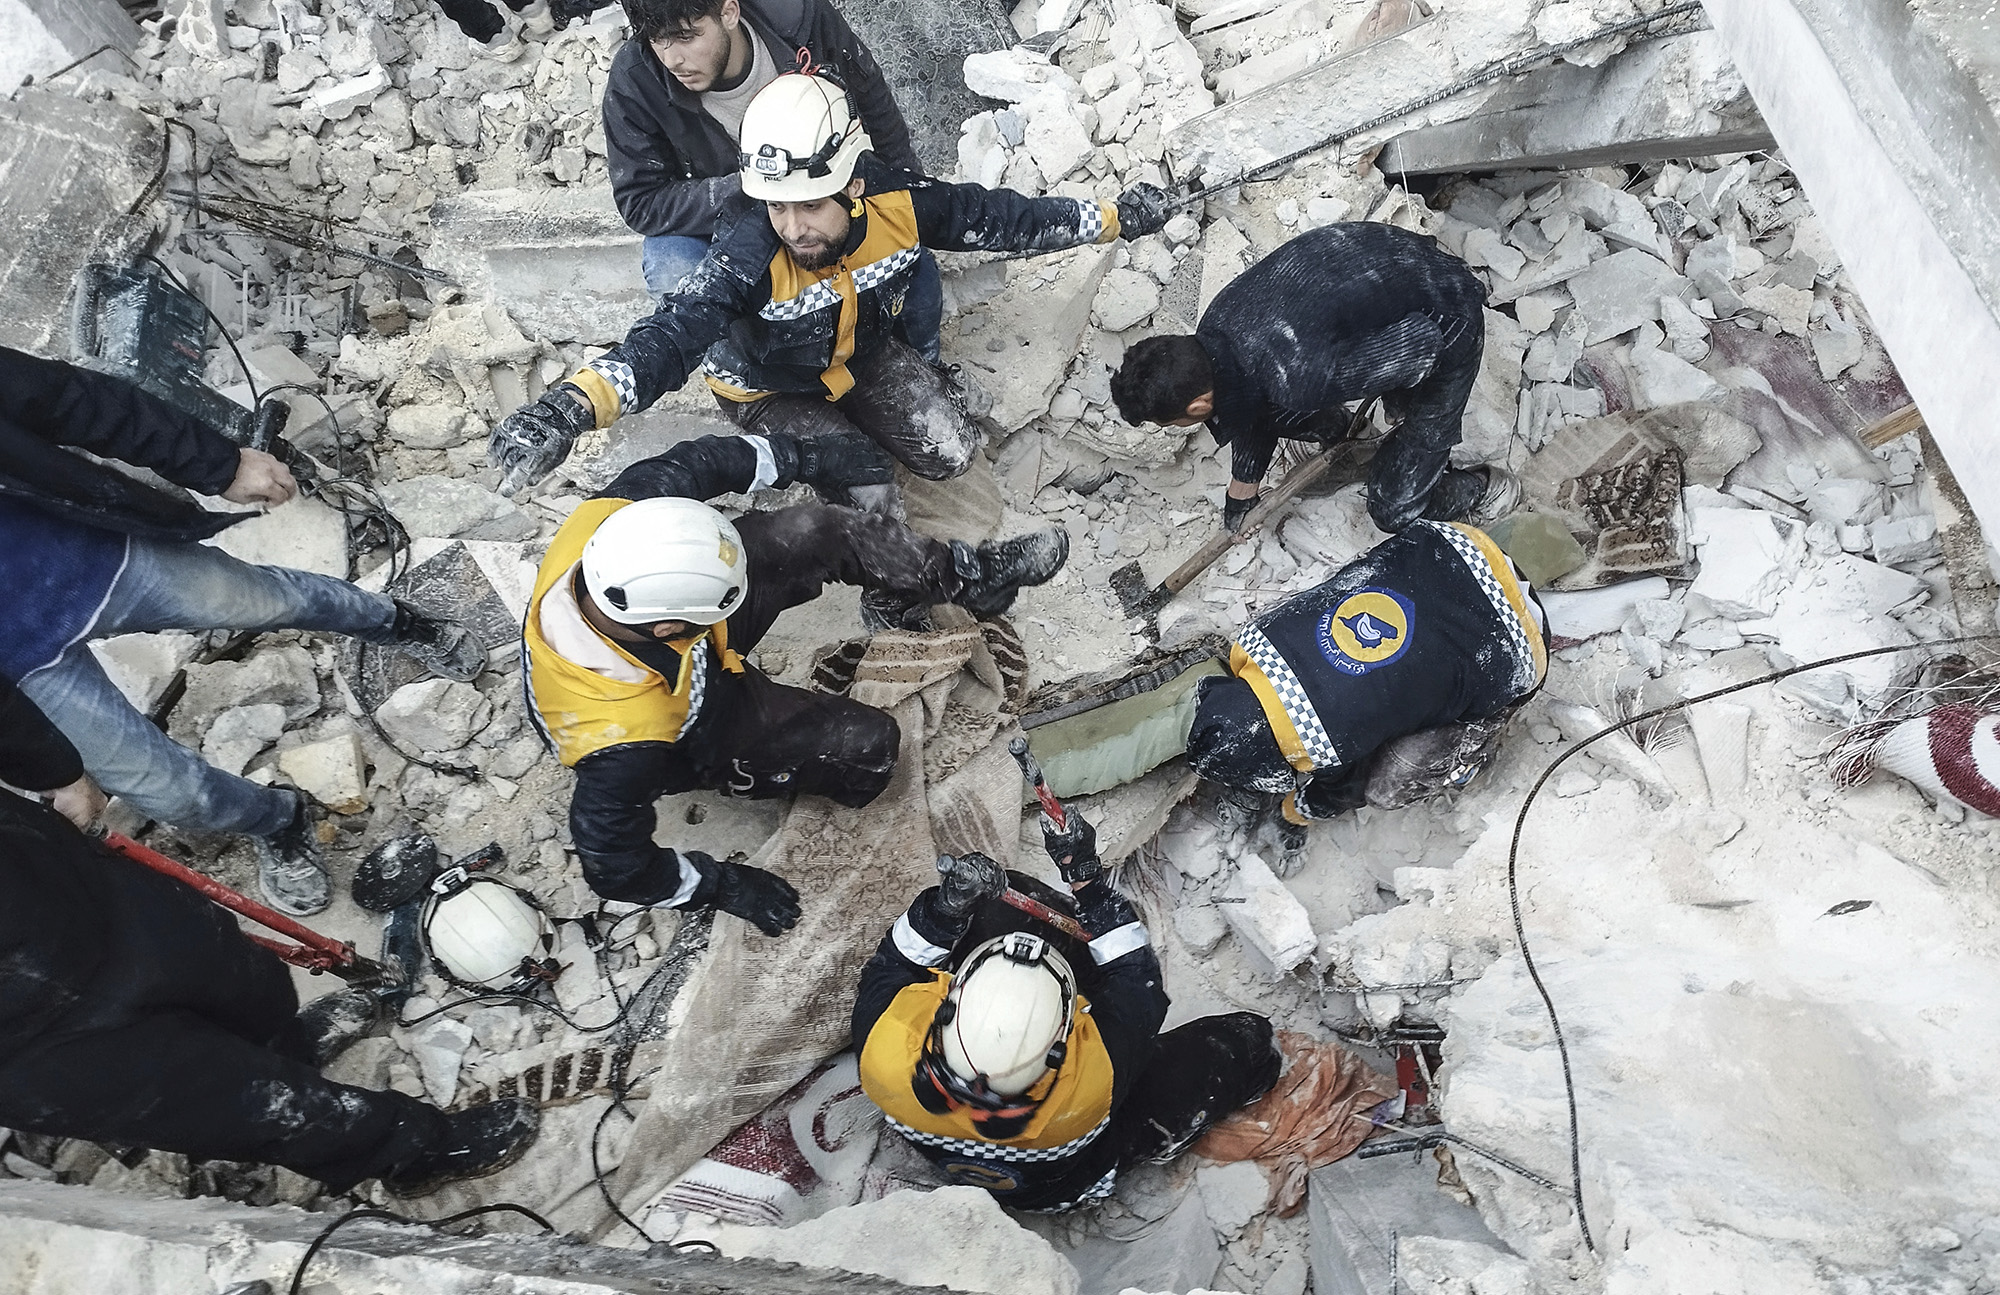 White Helmet rescue workers in Afrin, Syria, on February 6.